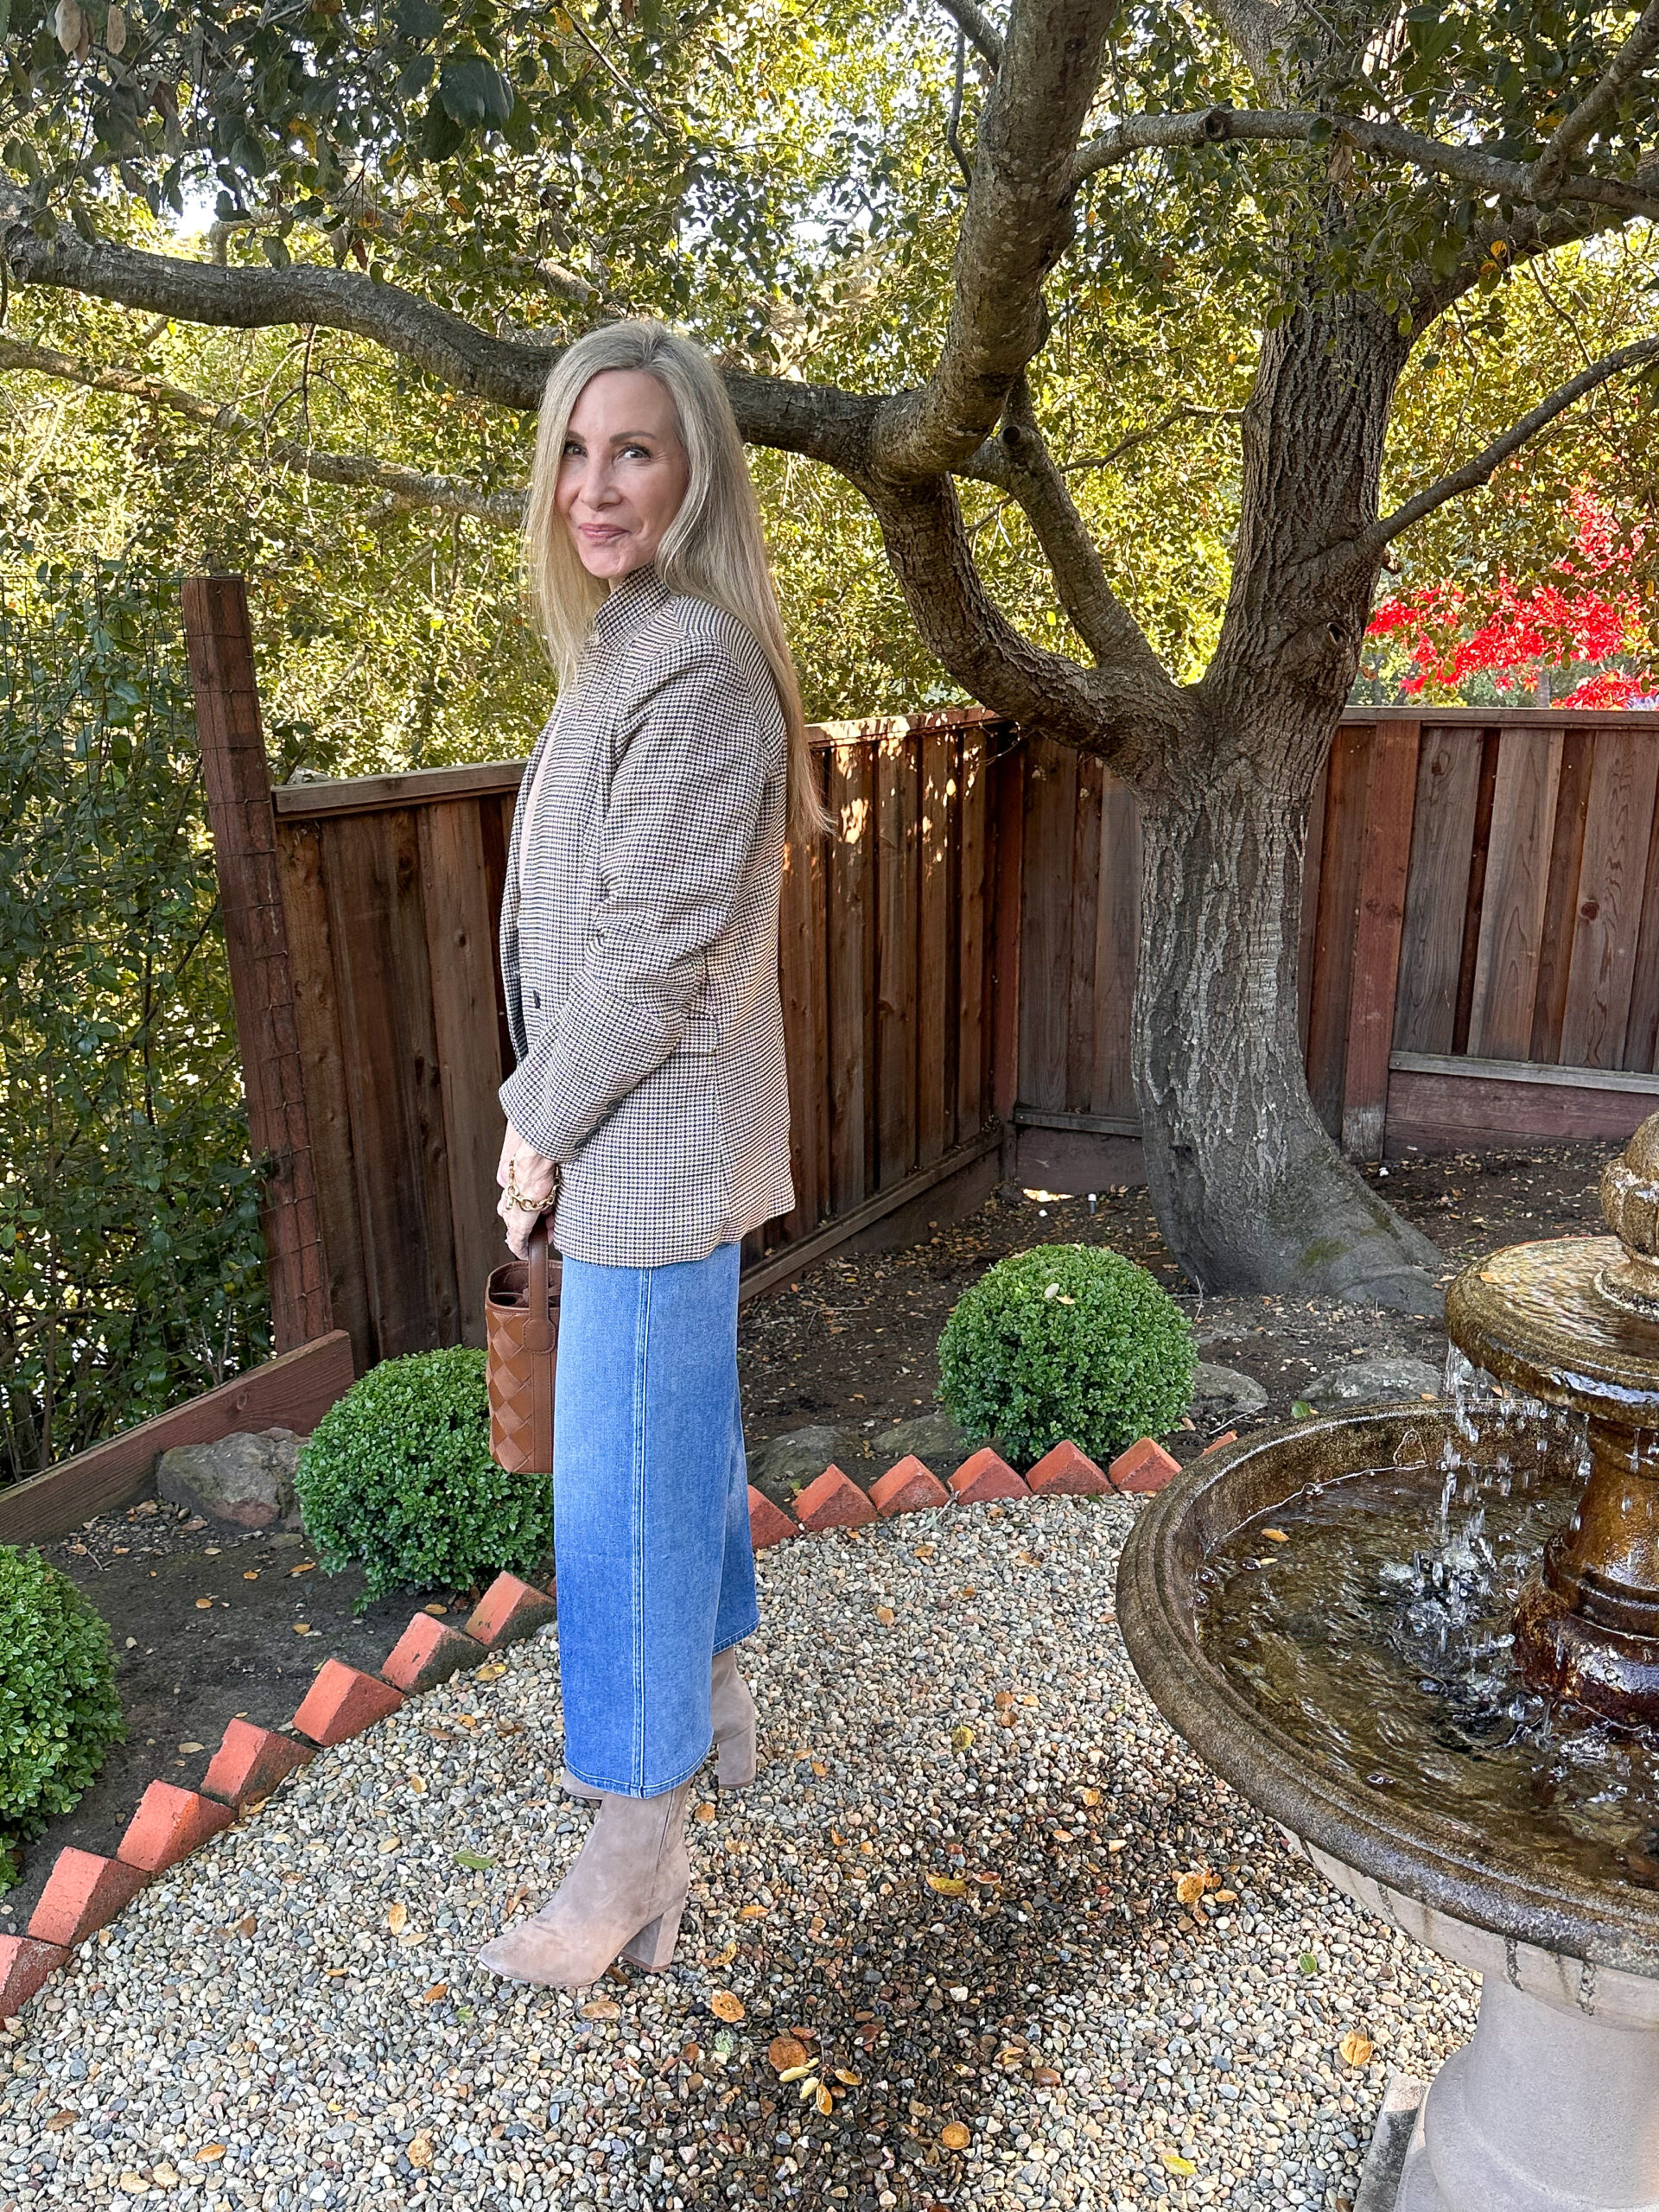 Woman standing in gravel garden path wearing jeans and a blazer.